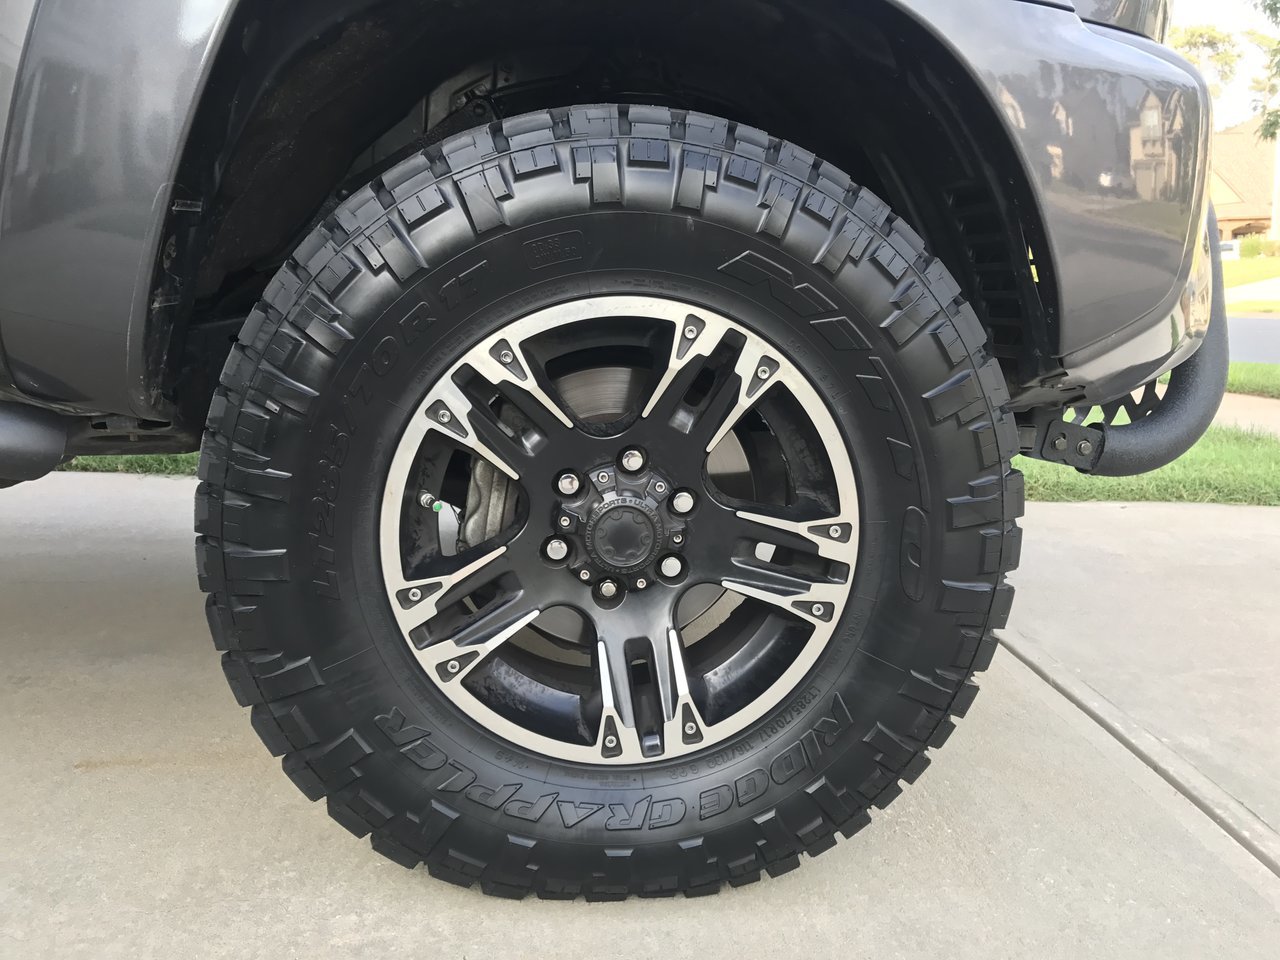 285/70 r17 nitto ridge grapplers with a 1.75" bilstein lift in front a...